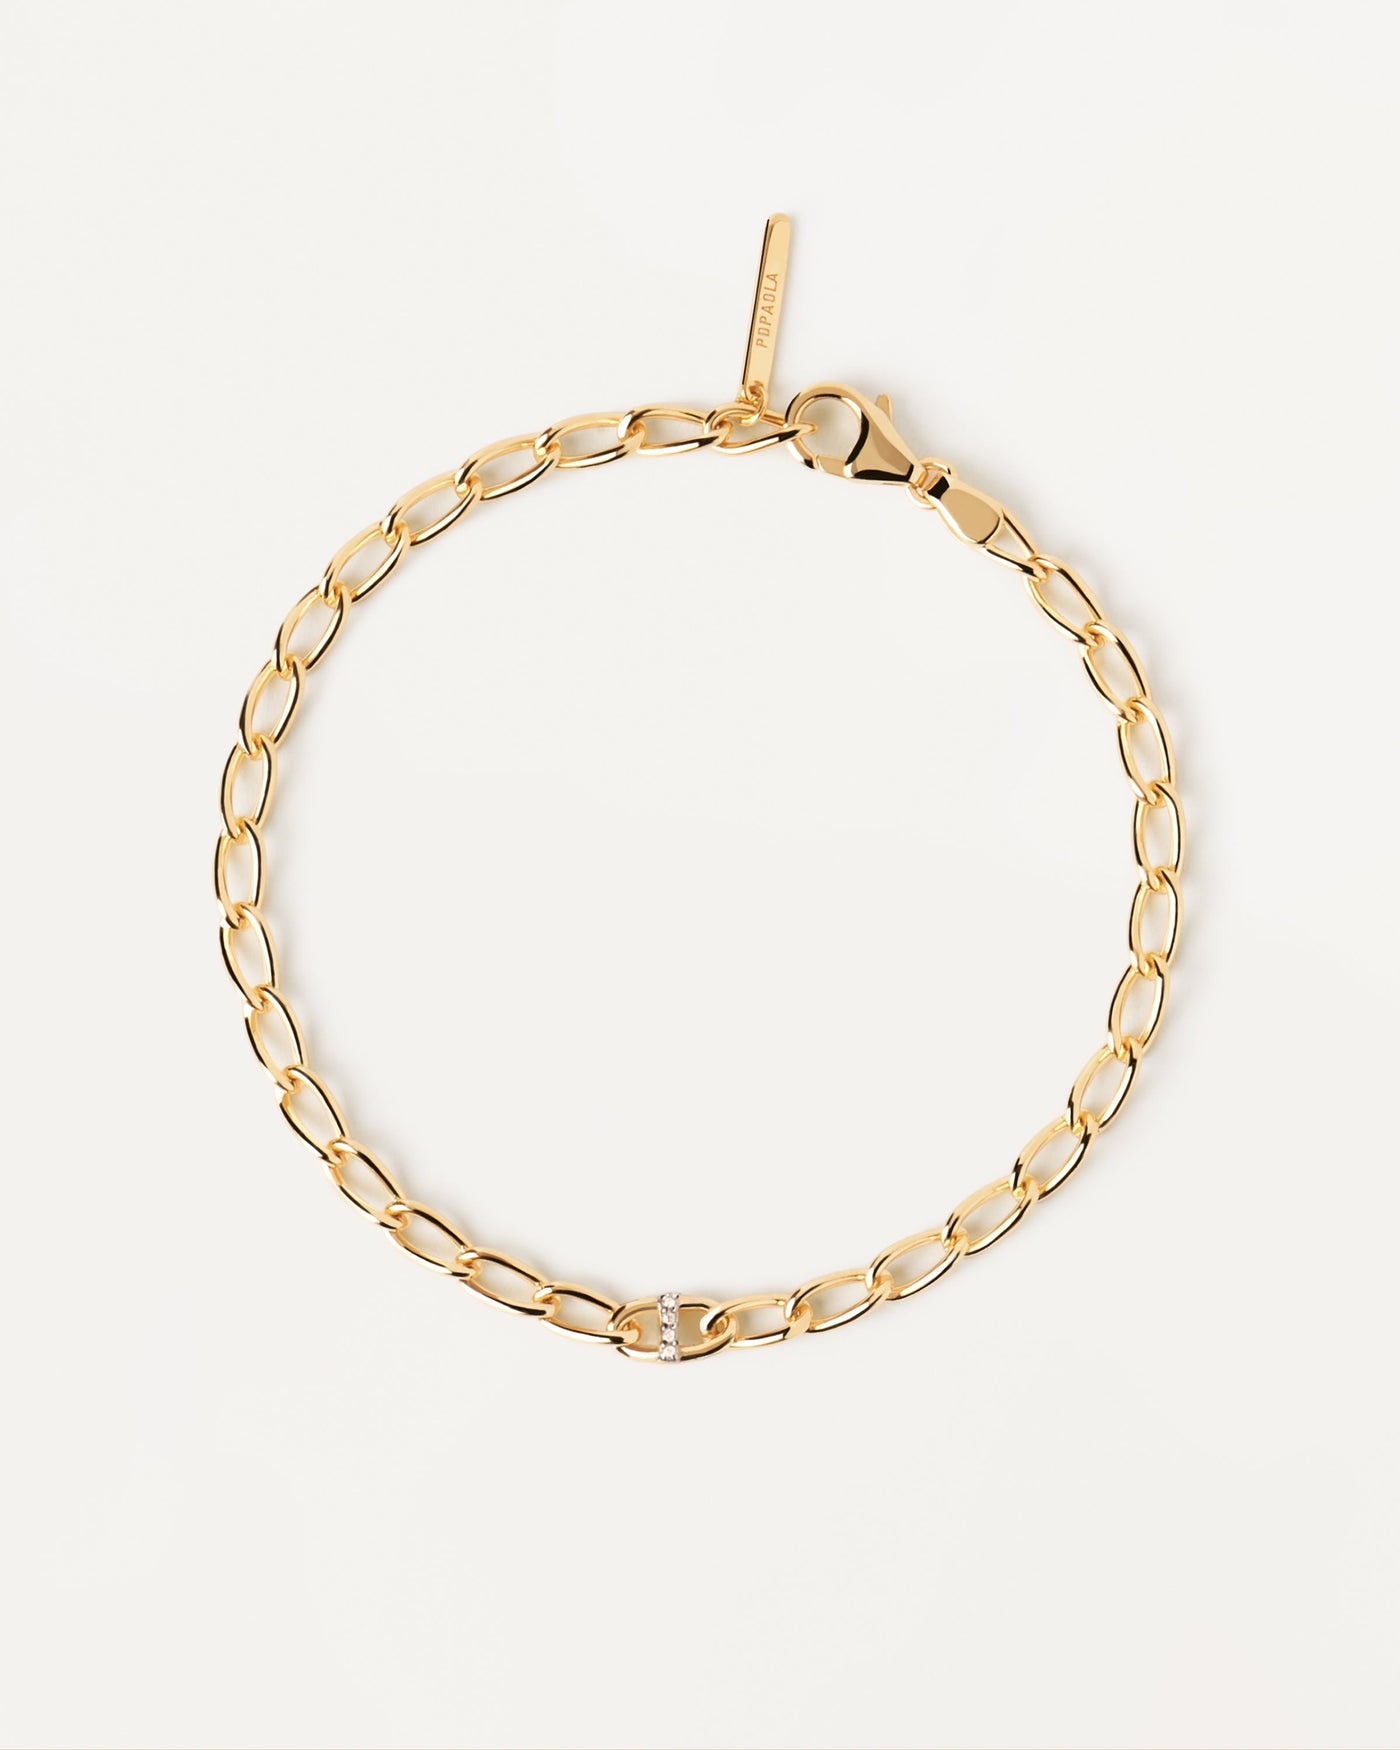 2023 Selection | Letter I Chain Bracelet. cable chain bracelet in gold-plated silver with initial I in zirconia. Get the latest arrival from PDPAOLA. Place your order safely and get this Best Seller. Free Shipping.